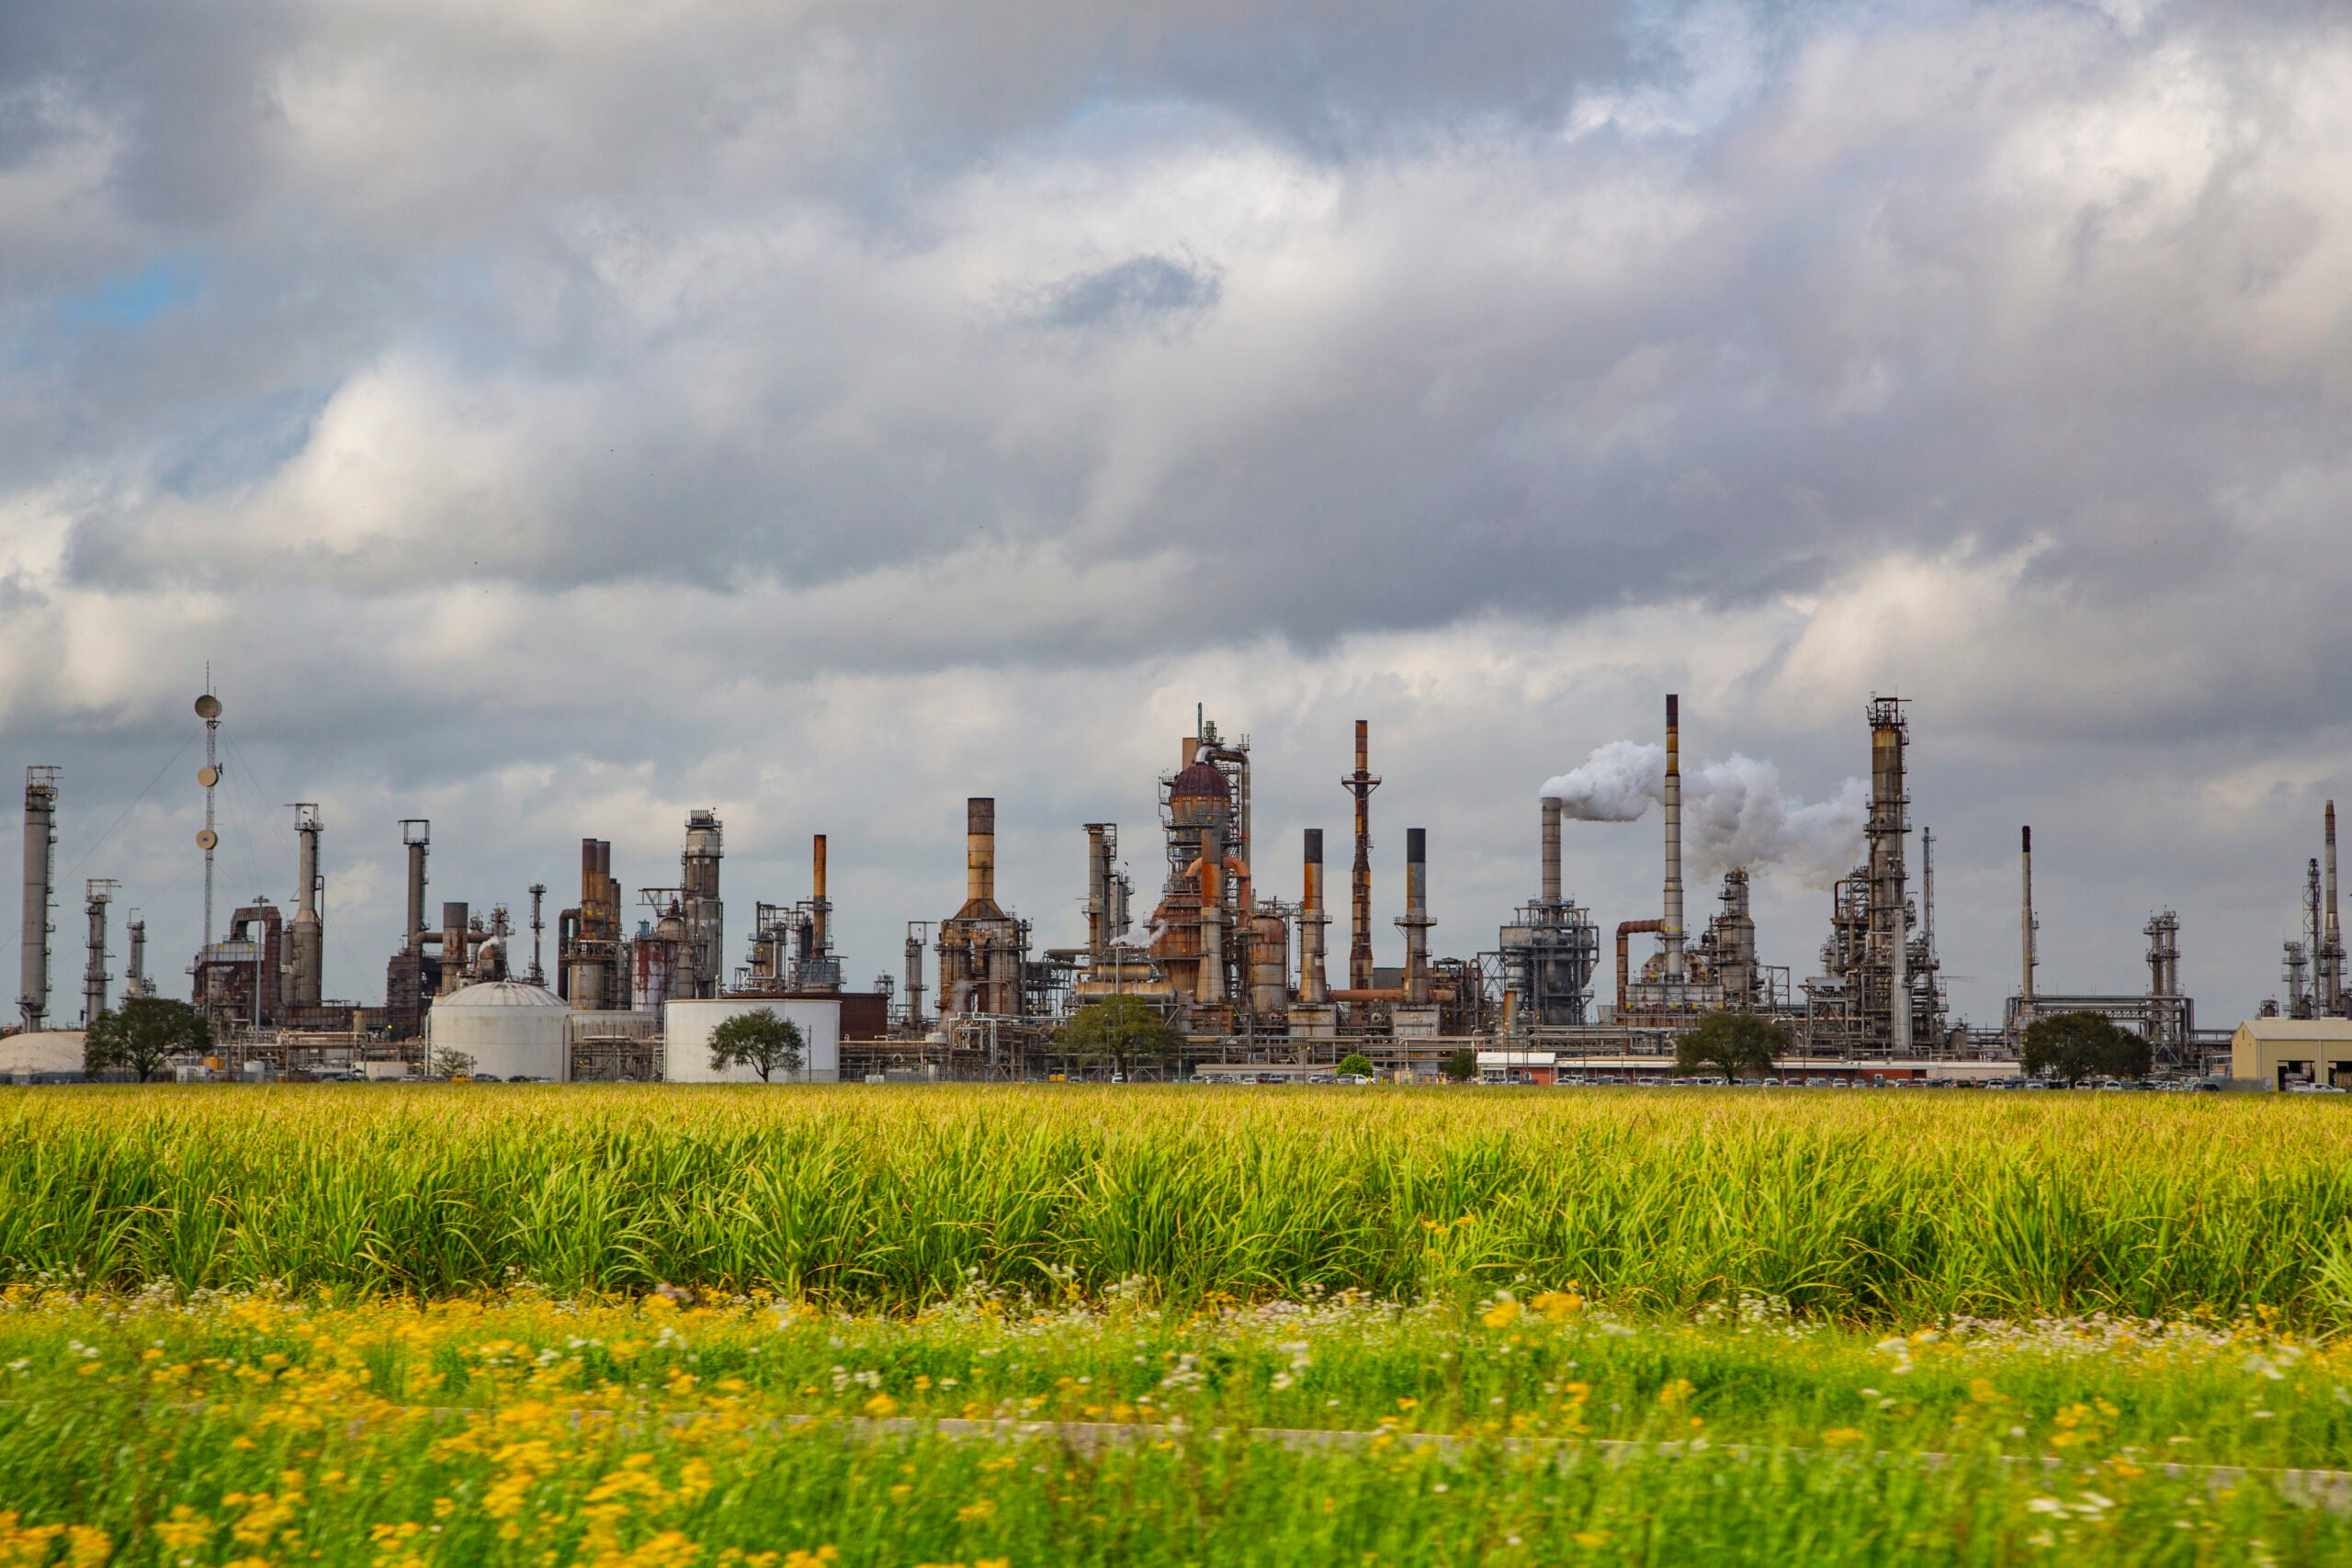 View of industrial chemical complex in St James, Louisiana.